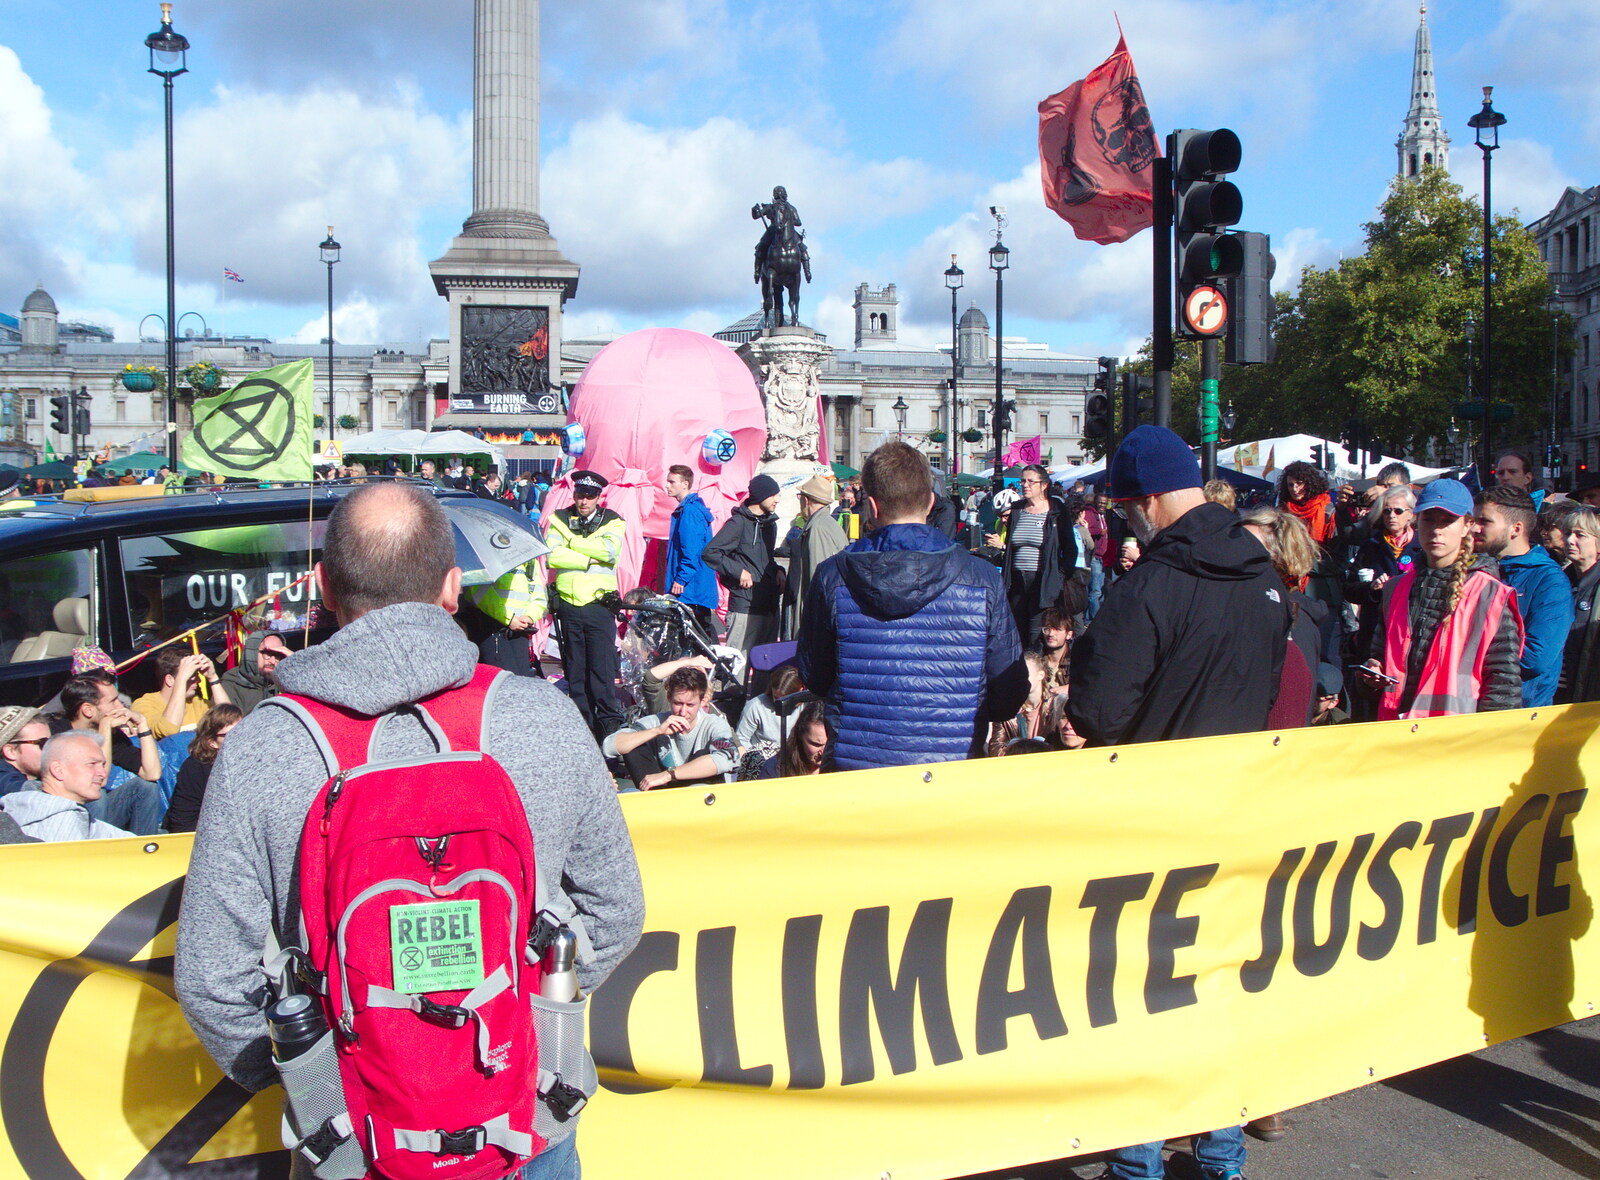 A Climate Justice banner from The Extinction Rebellion Protest, Westminster, London - 9th October 2019